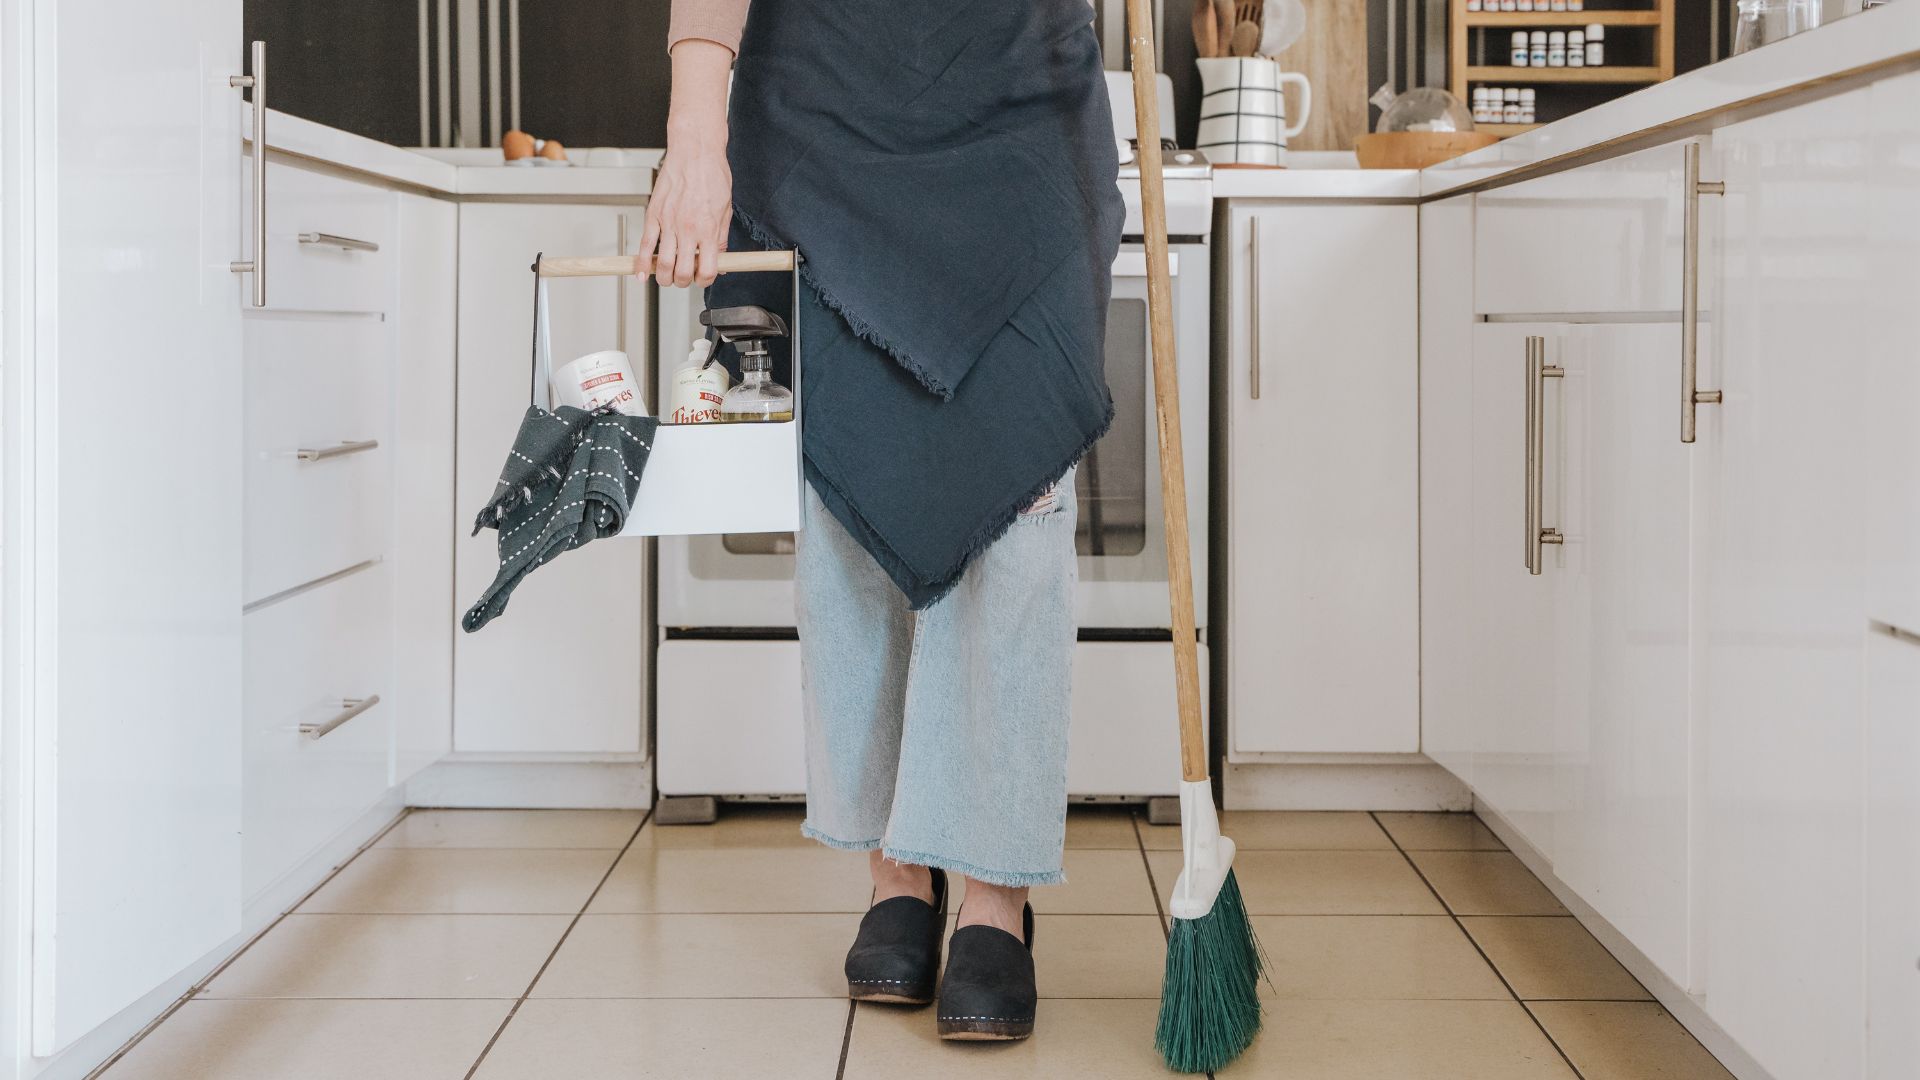 A person holding an umbrella and a mop in the kitchen.